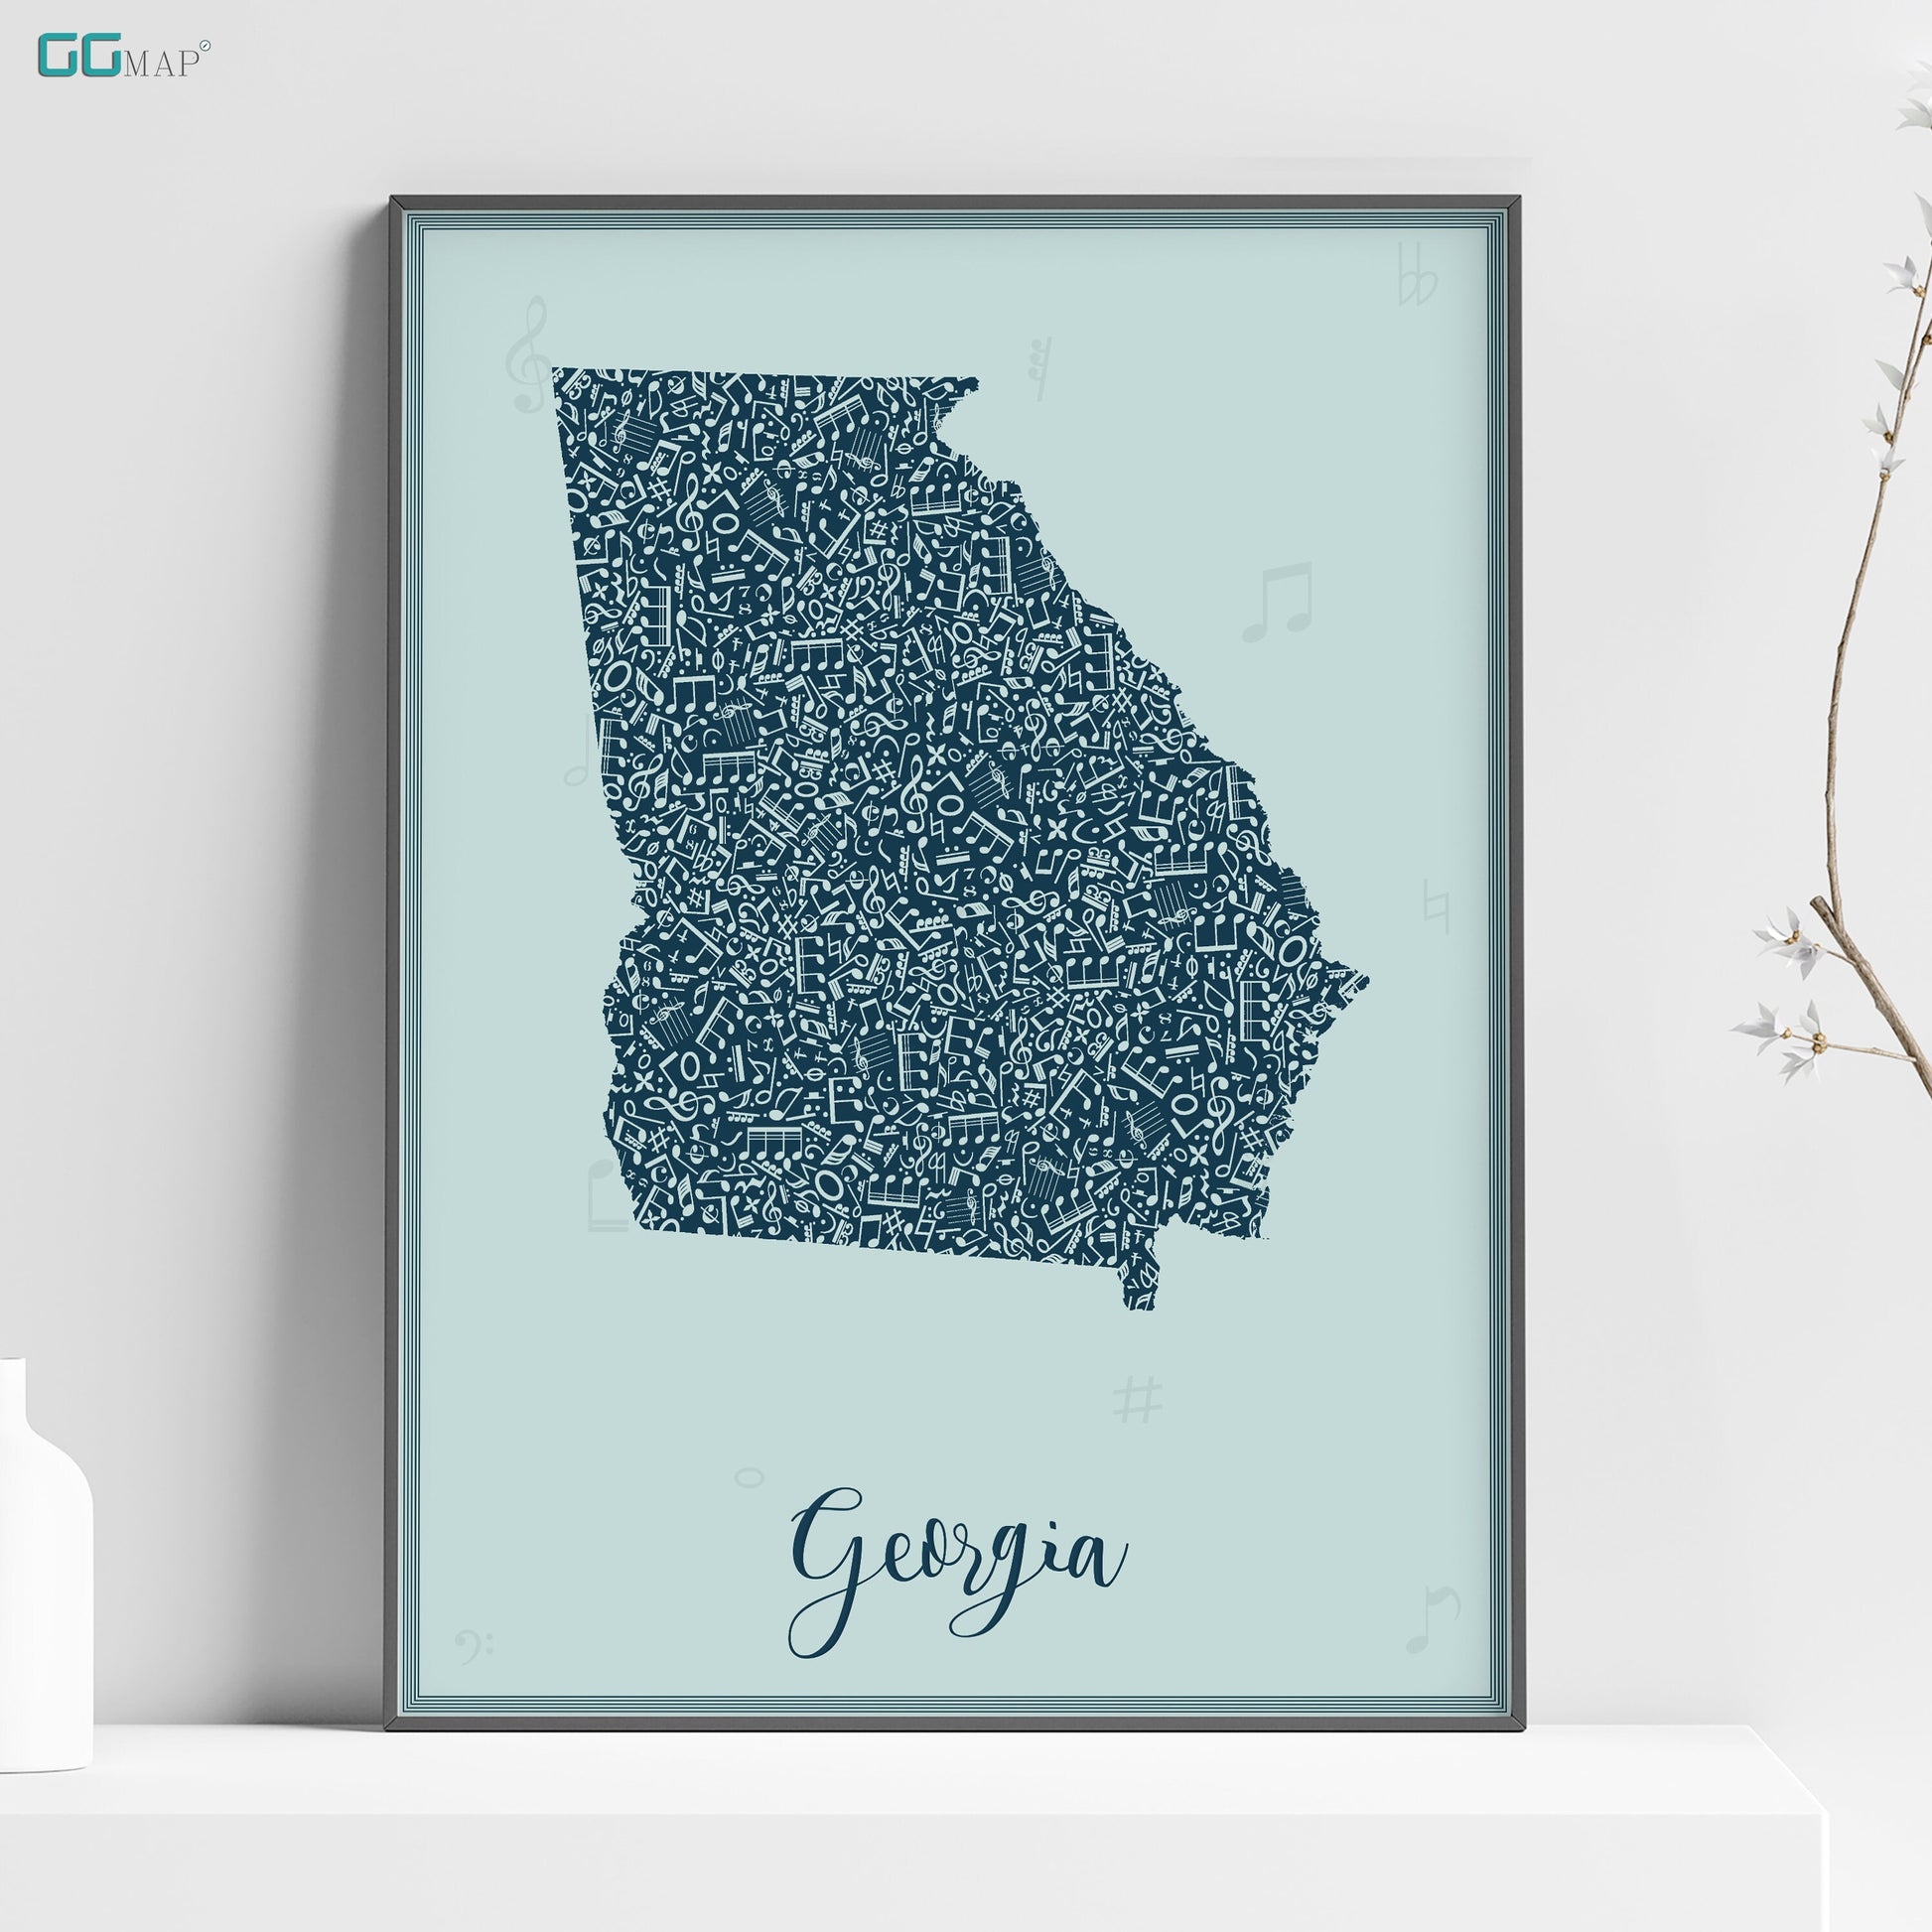 a picture of a map of the state of georgia